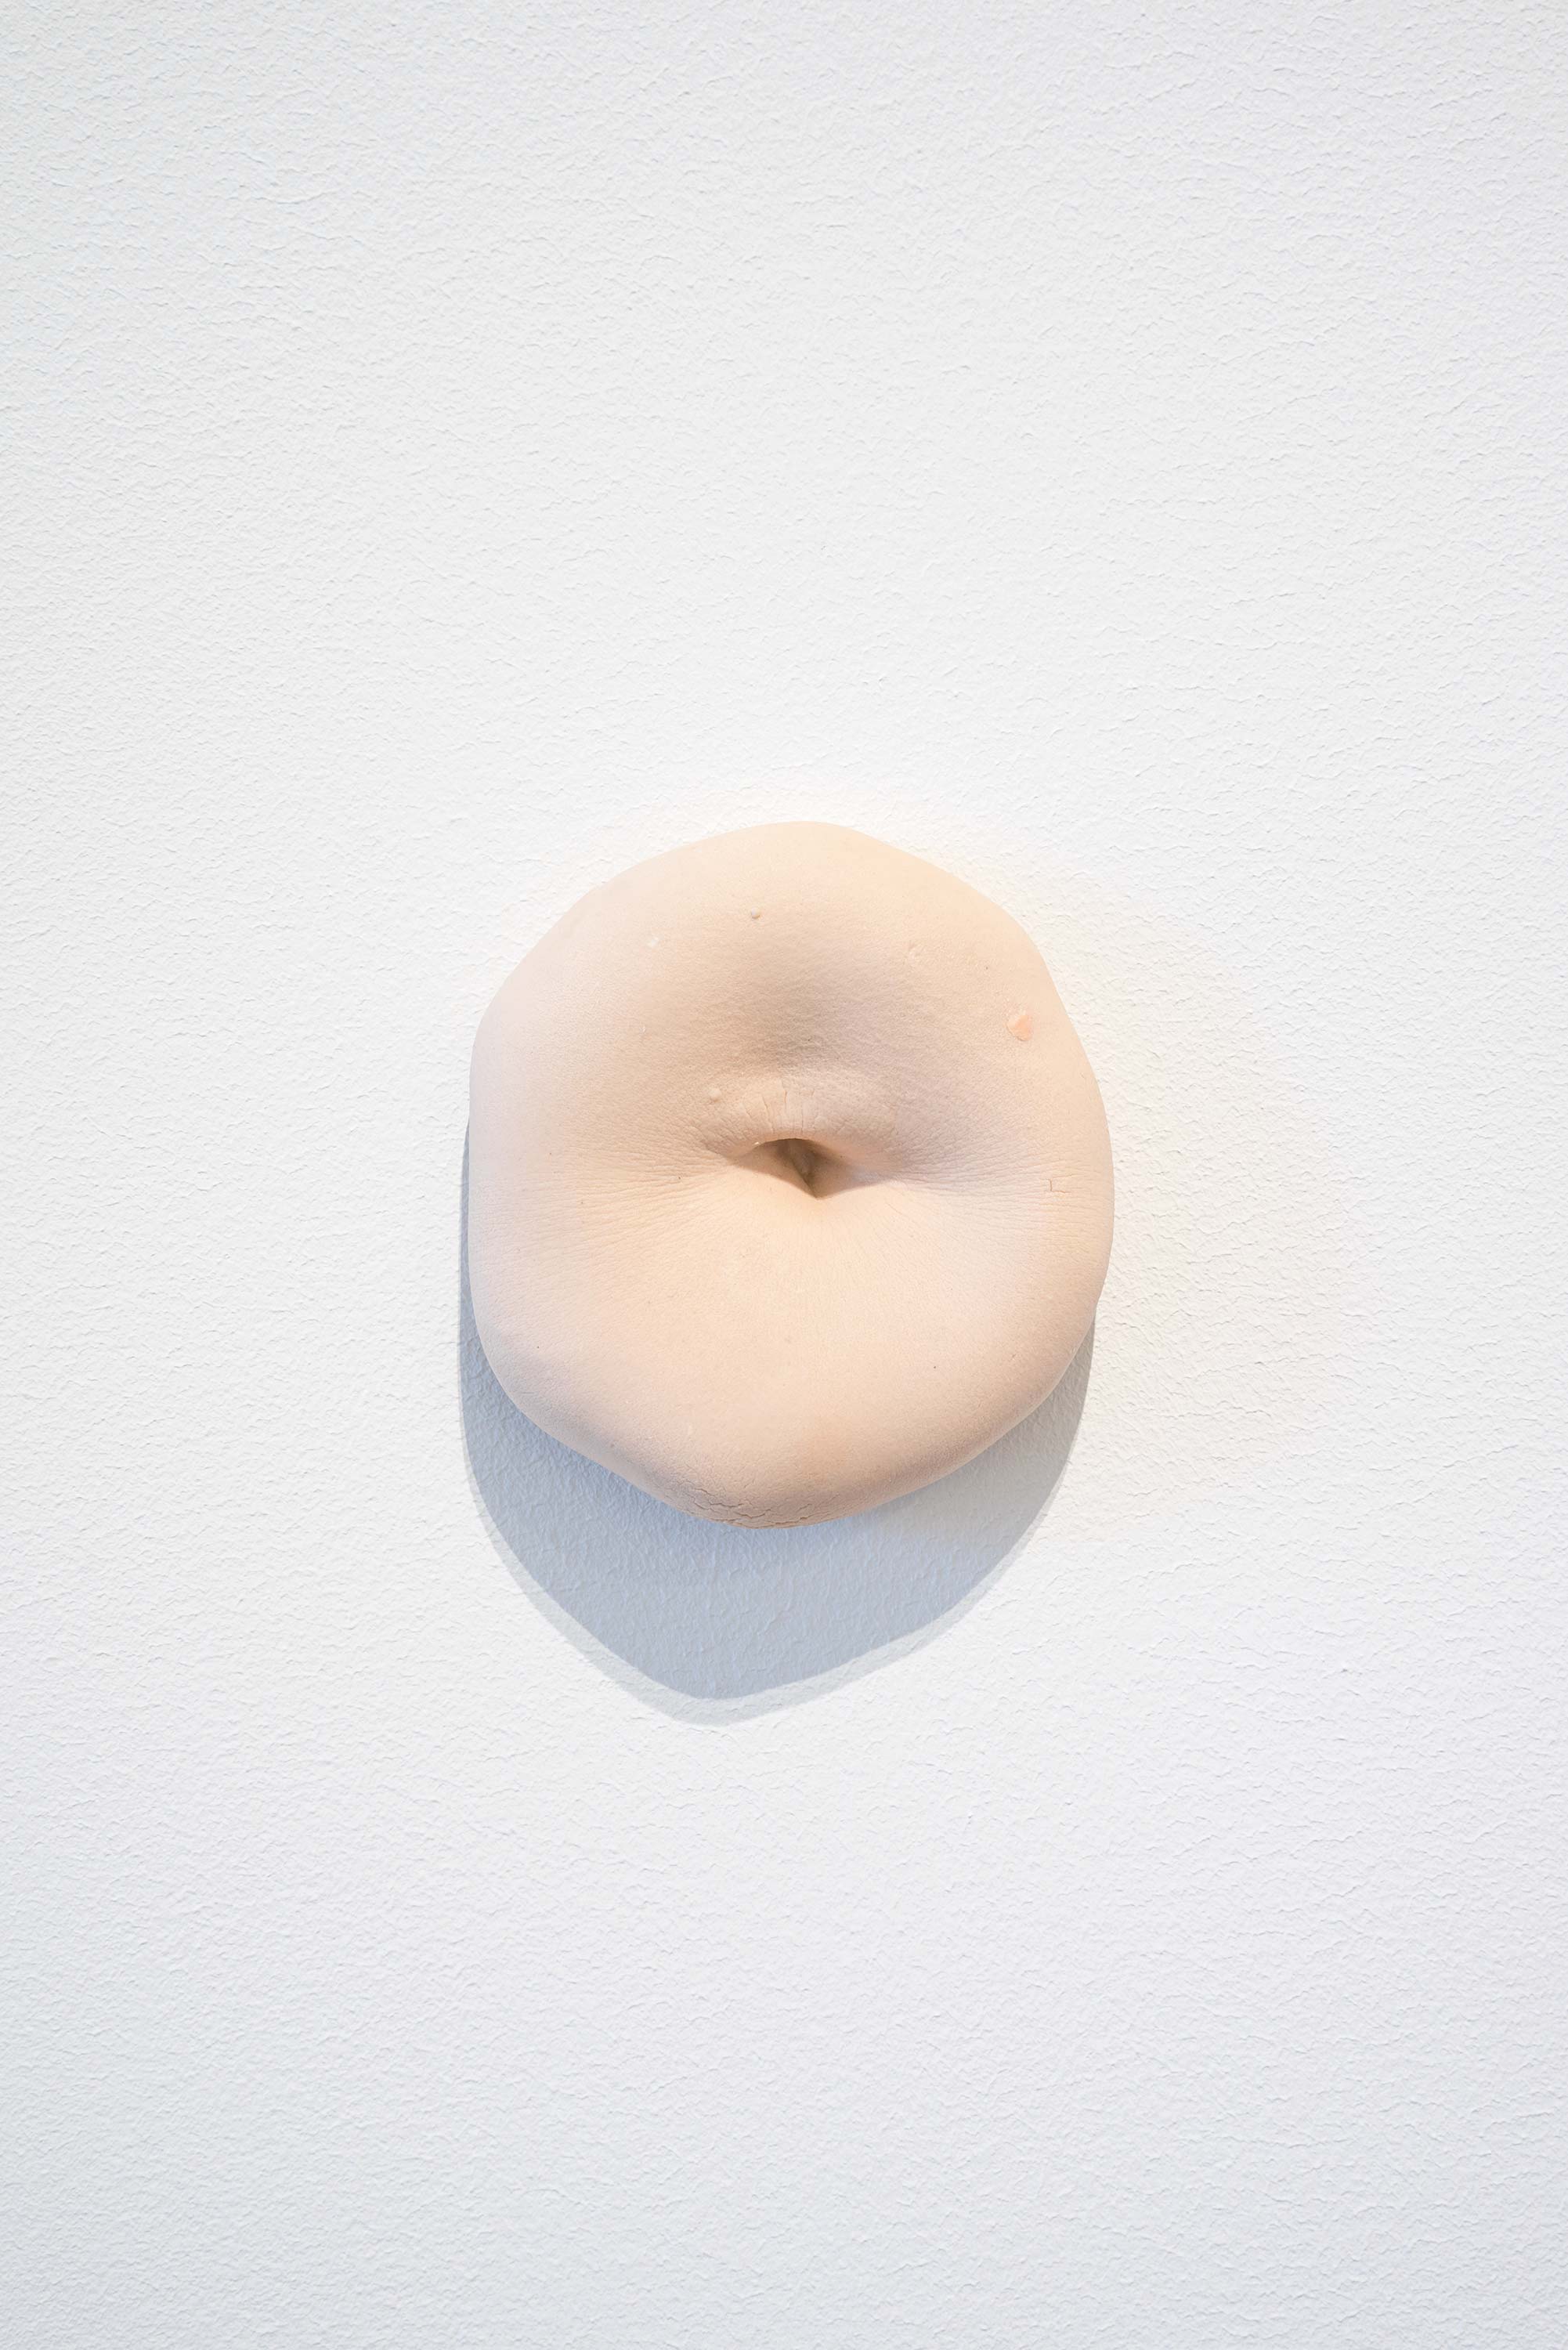 Kylie Lockwood<br>Cast of Navel<br>2013<br>Pigmented porcelain<br>3.5 x 3.25 x 1.25 inches (9 x 8.3 x 3.2 cm)